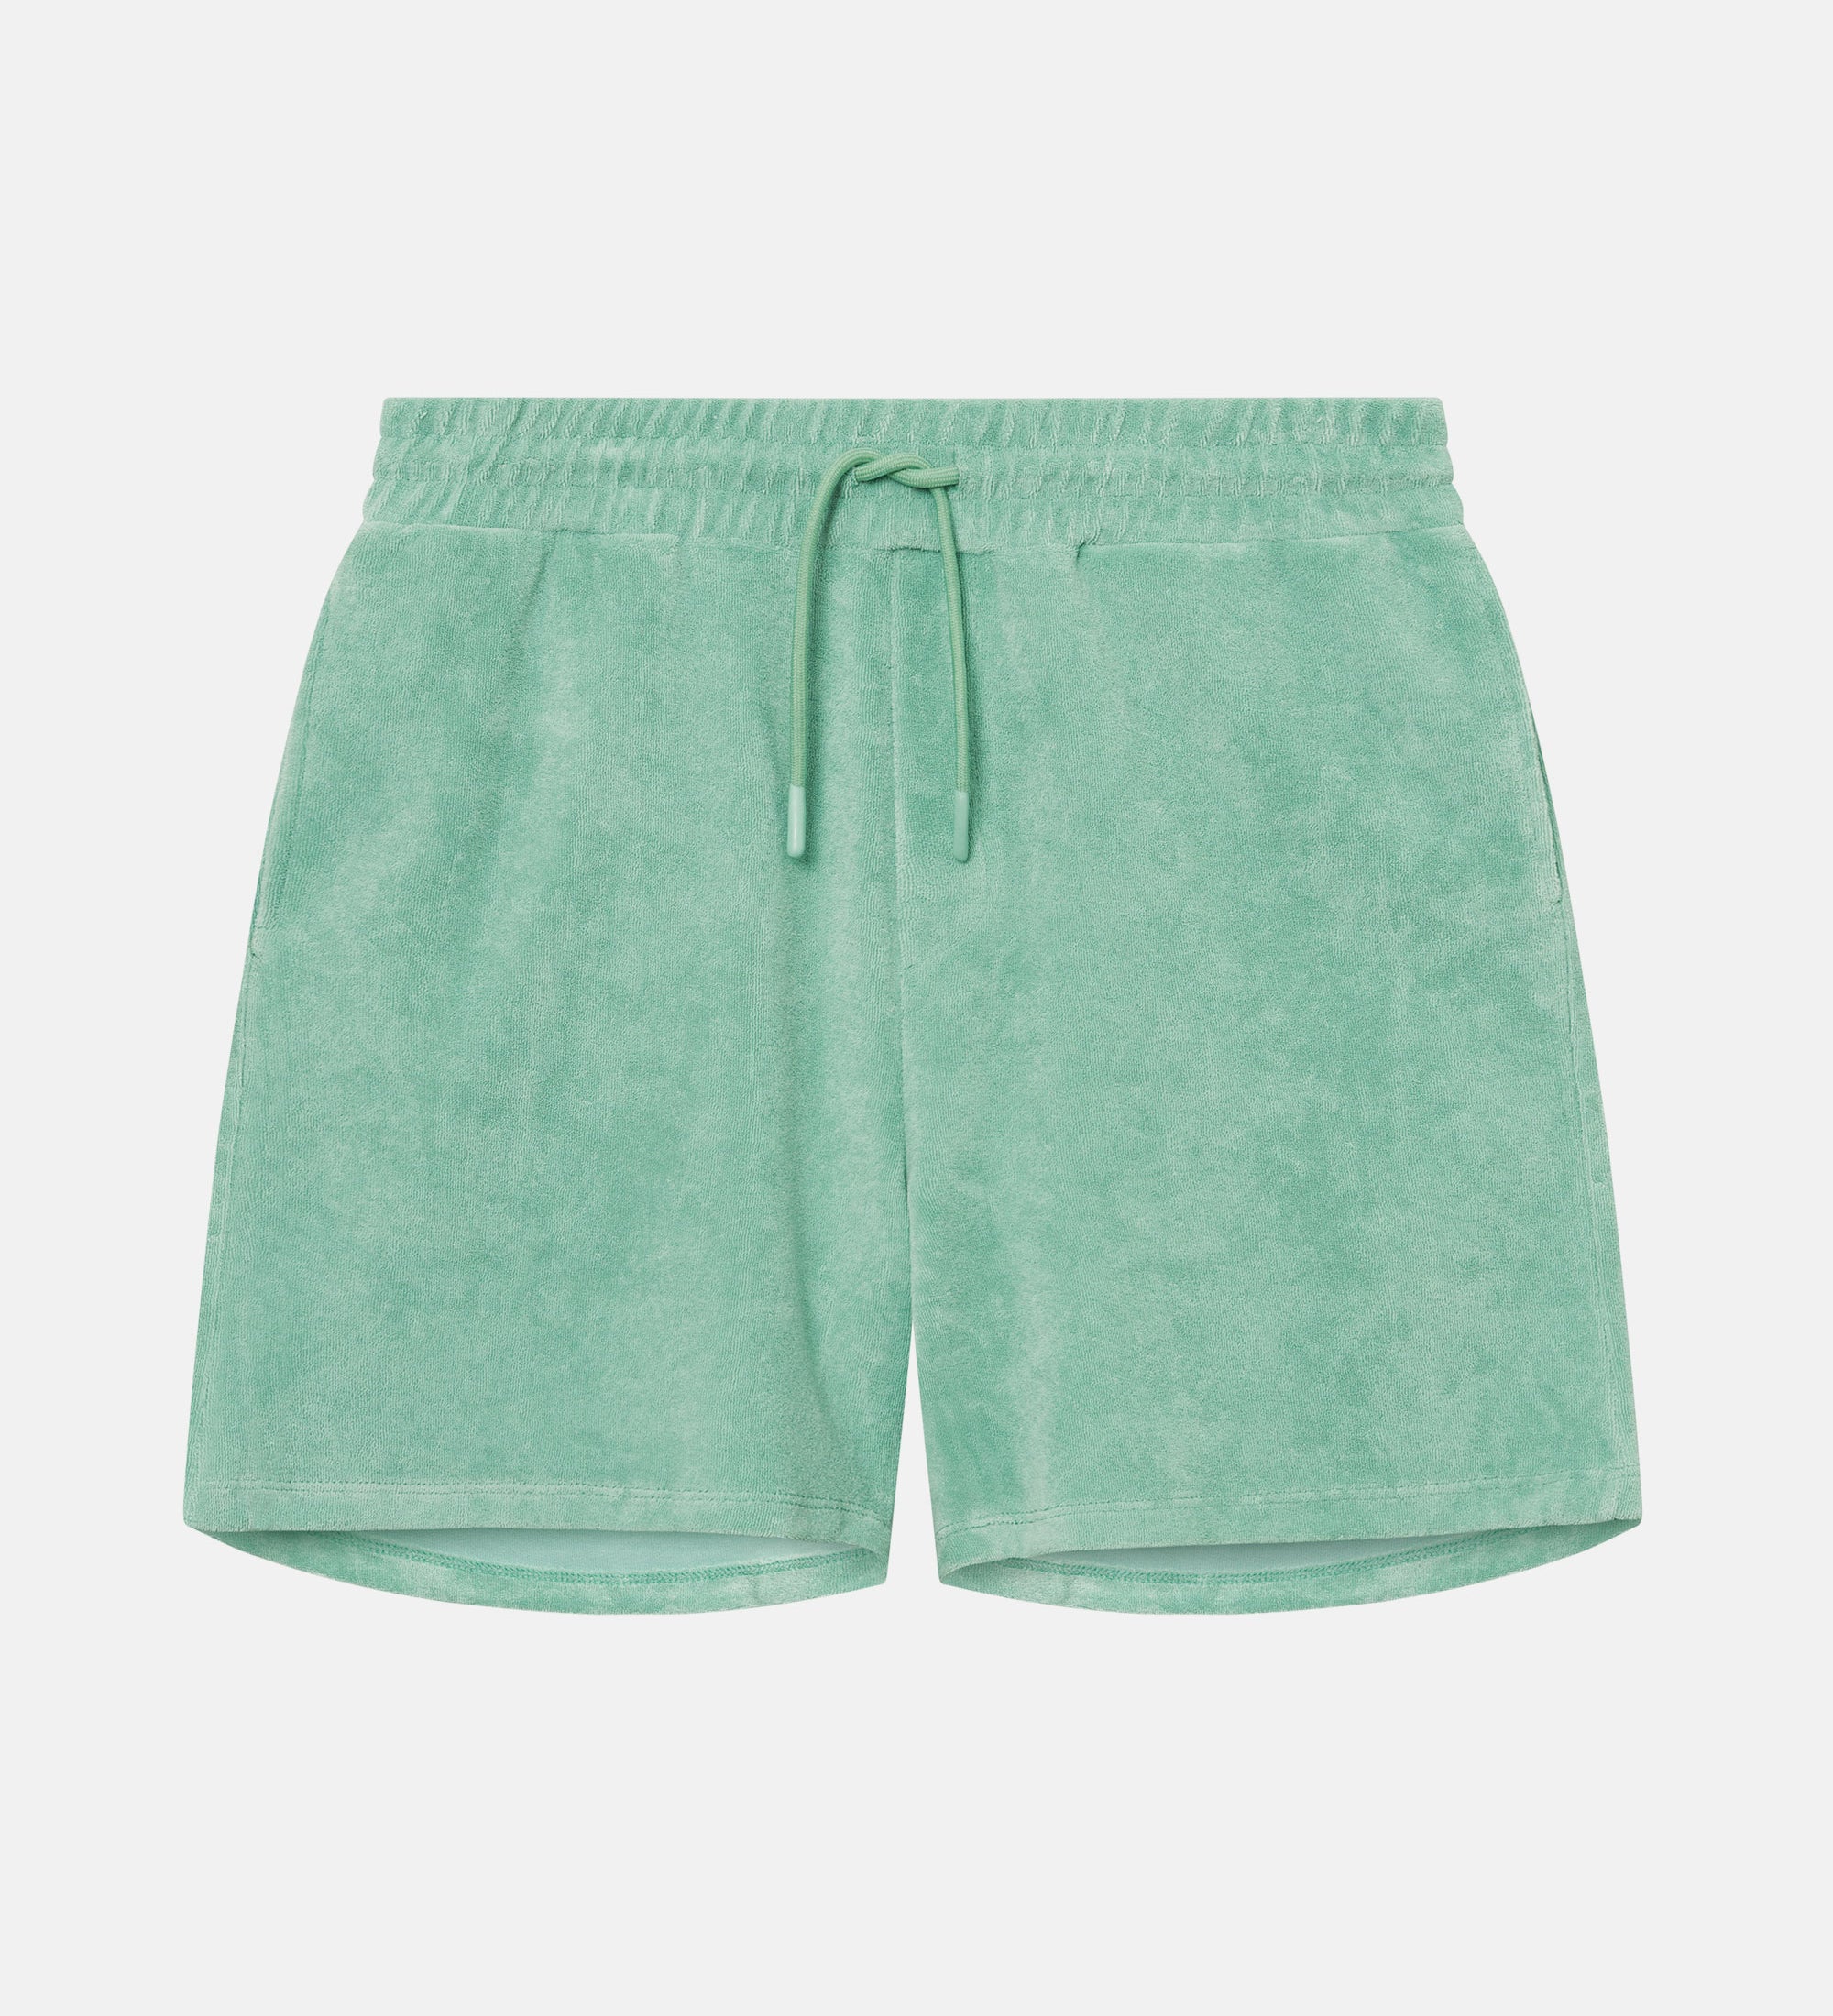 Grey-green mid length shorts in terry toweling fabric with drawdtring and two side pockets.